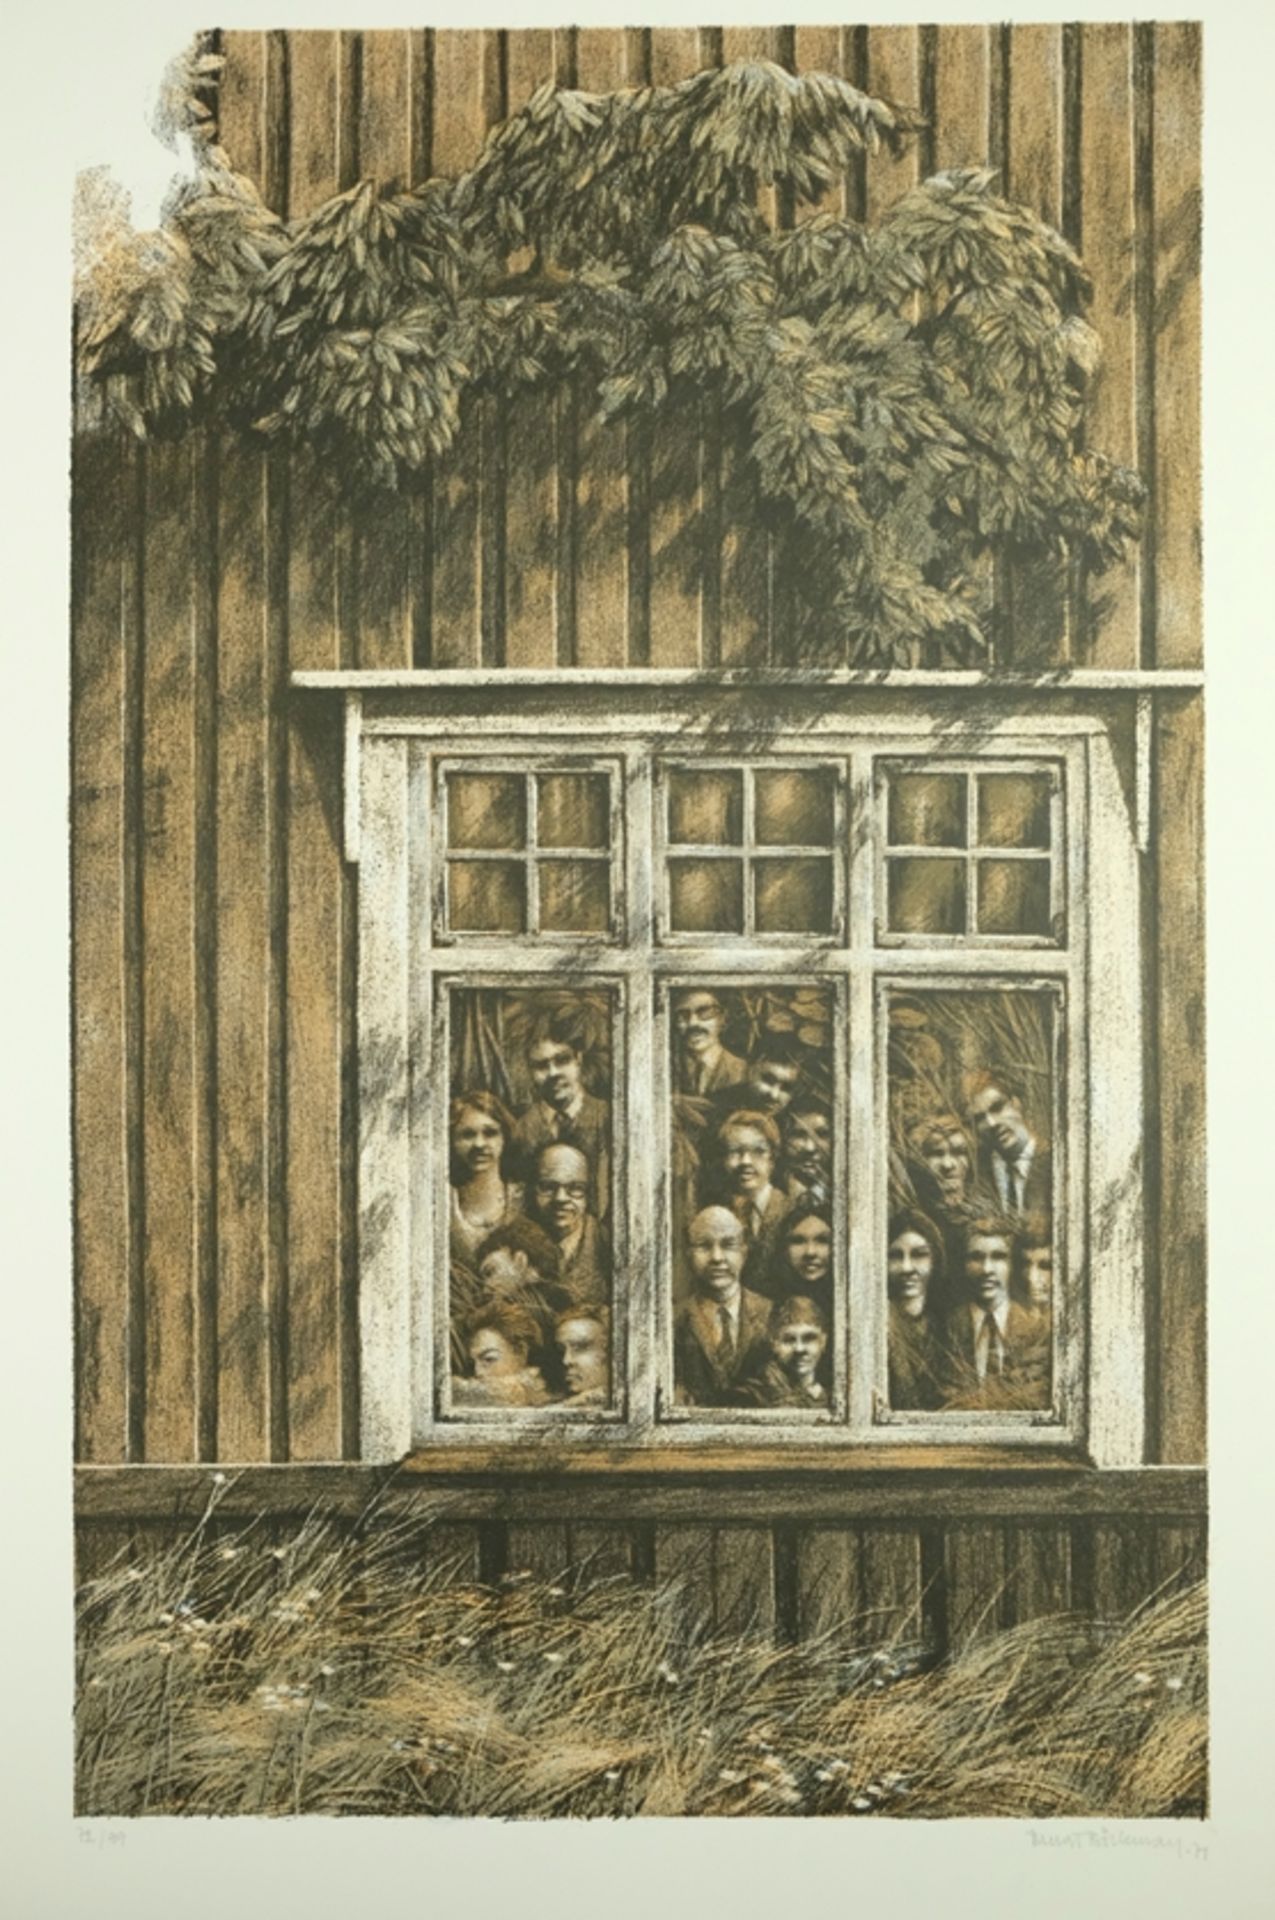 Böckmann, Bengt (born 1937) "Untitled", facade of a wooden house, large window from which 19 human 